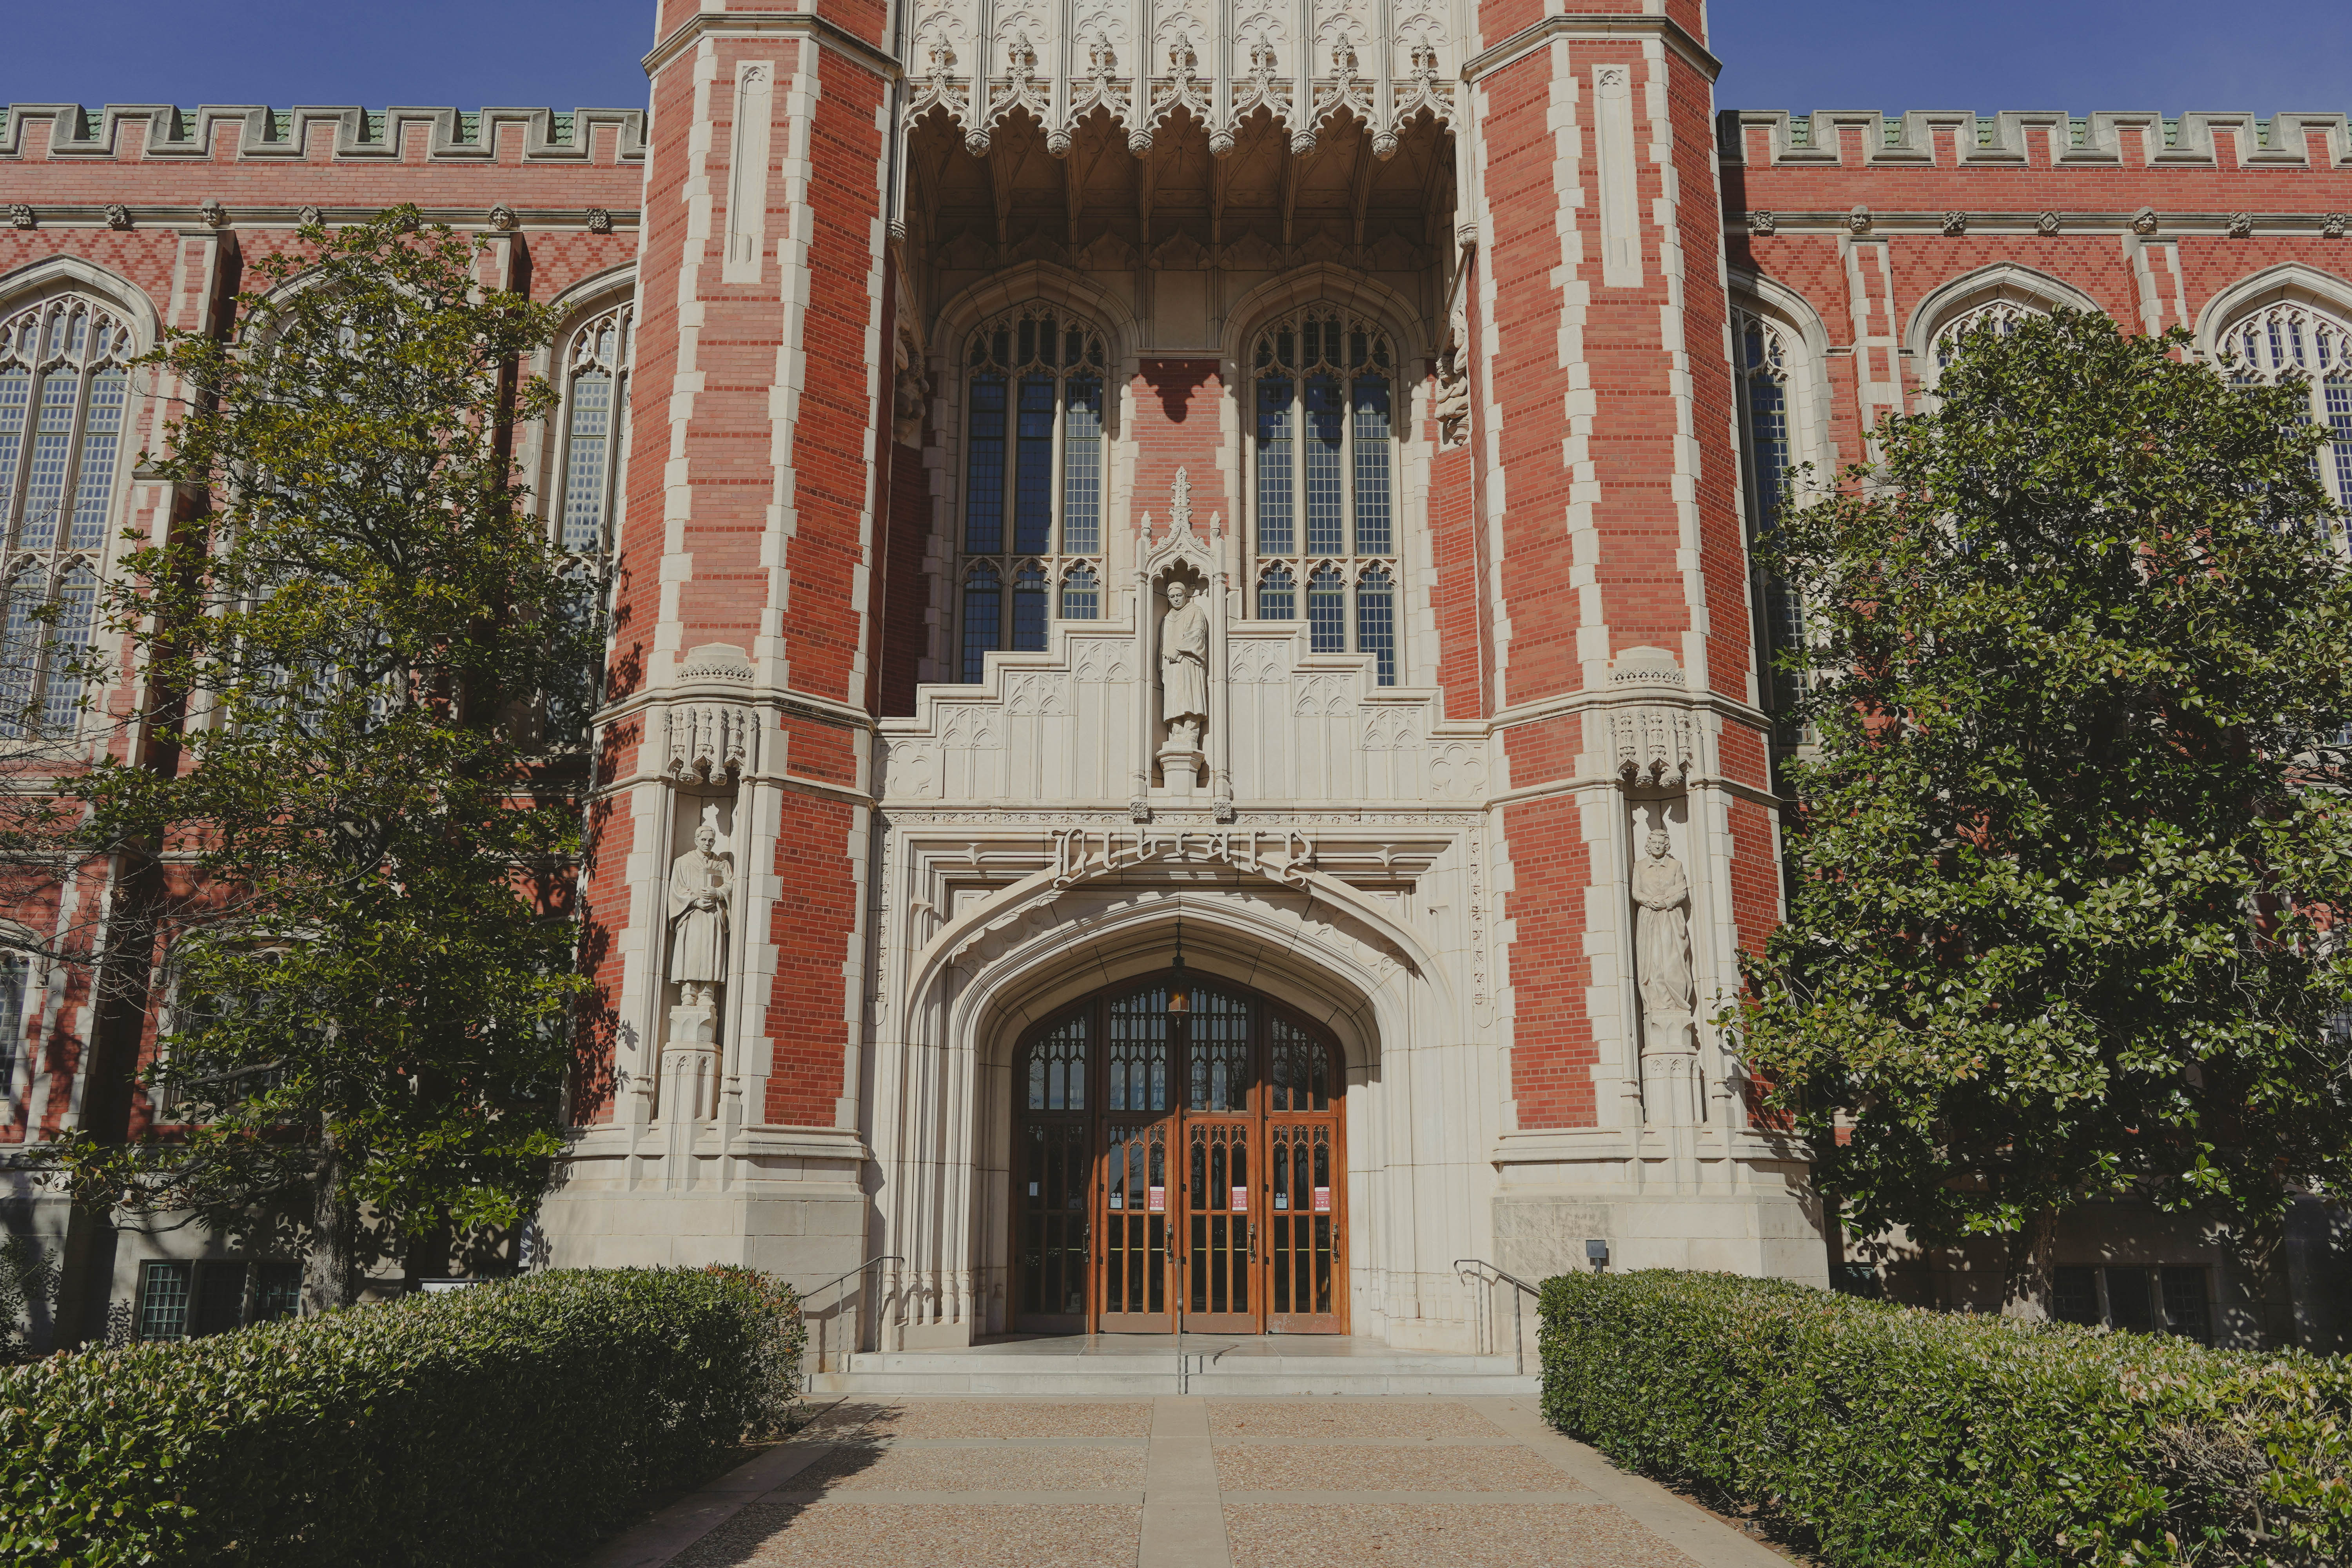 Front view of the bizzell library.